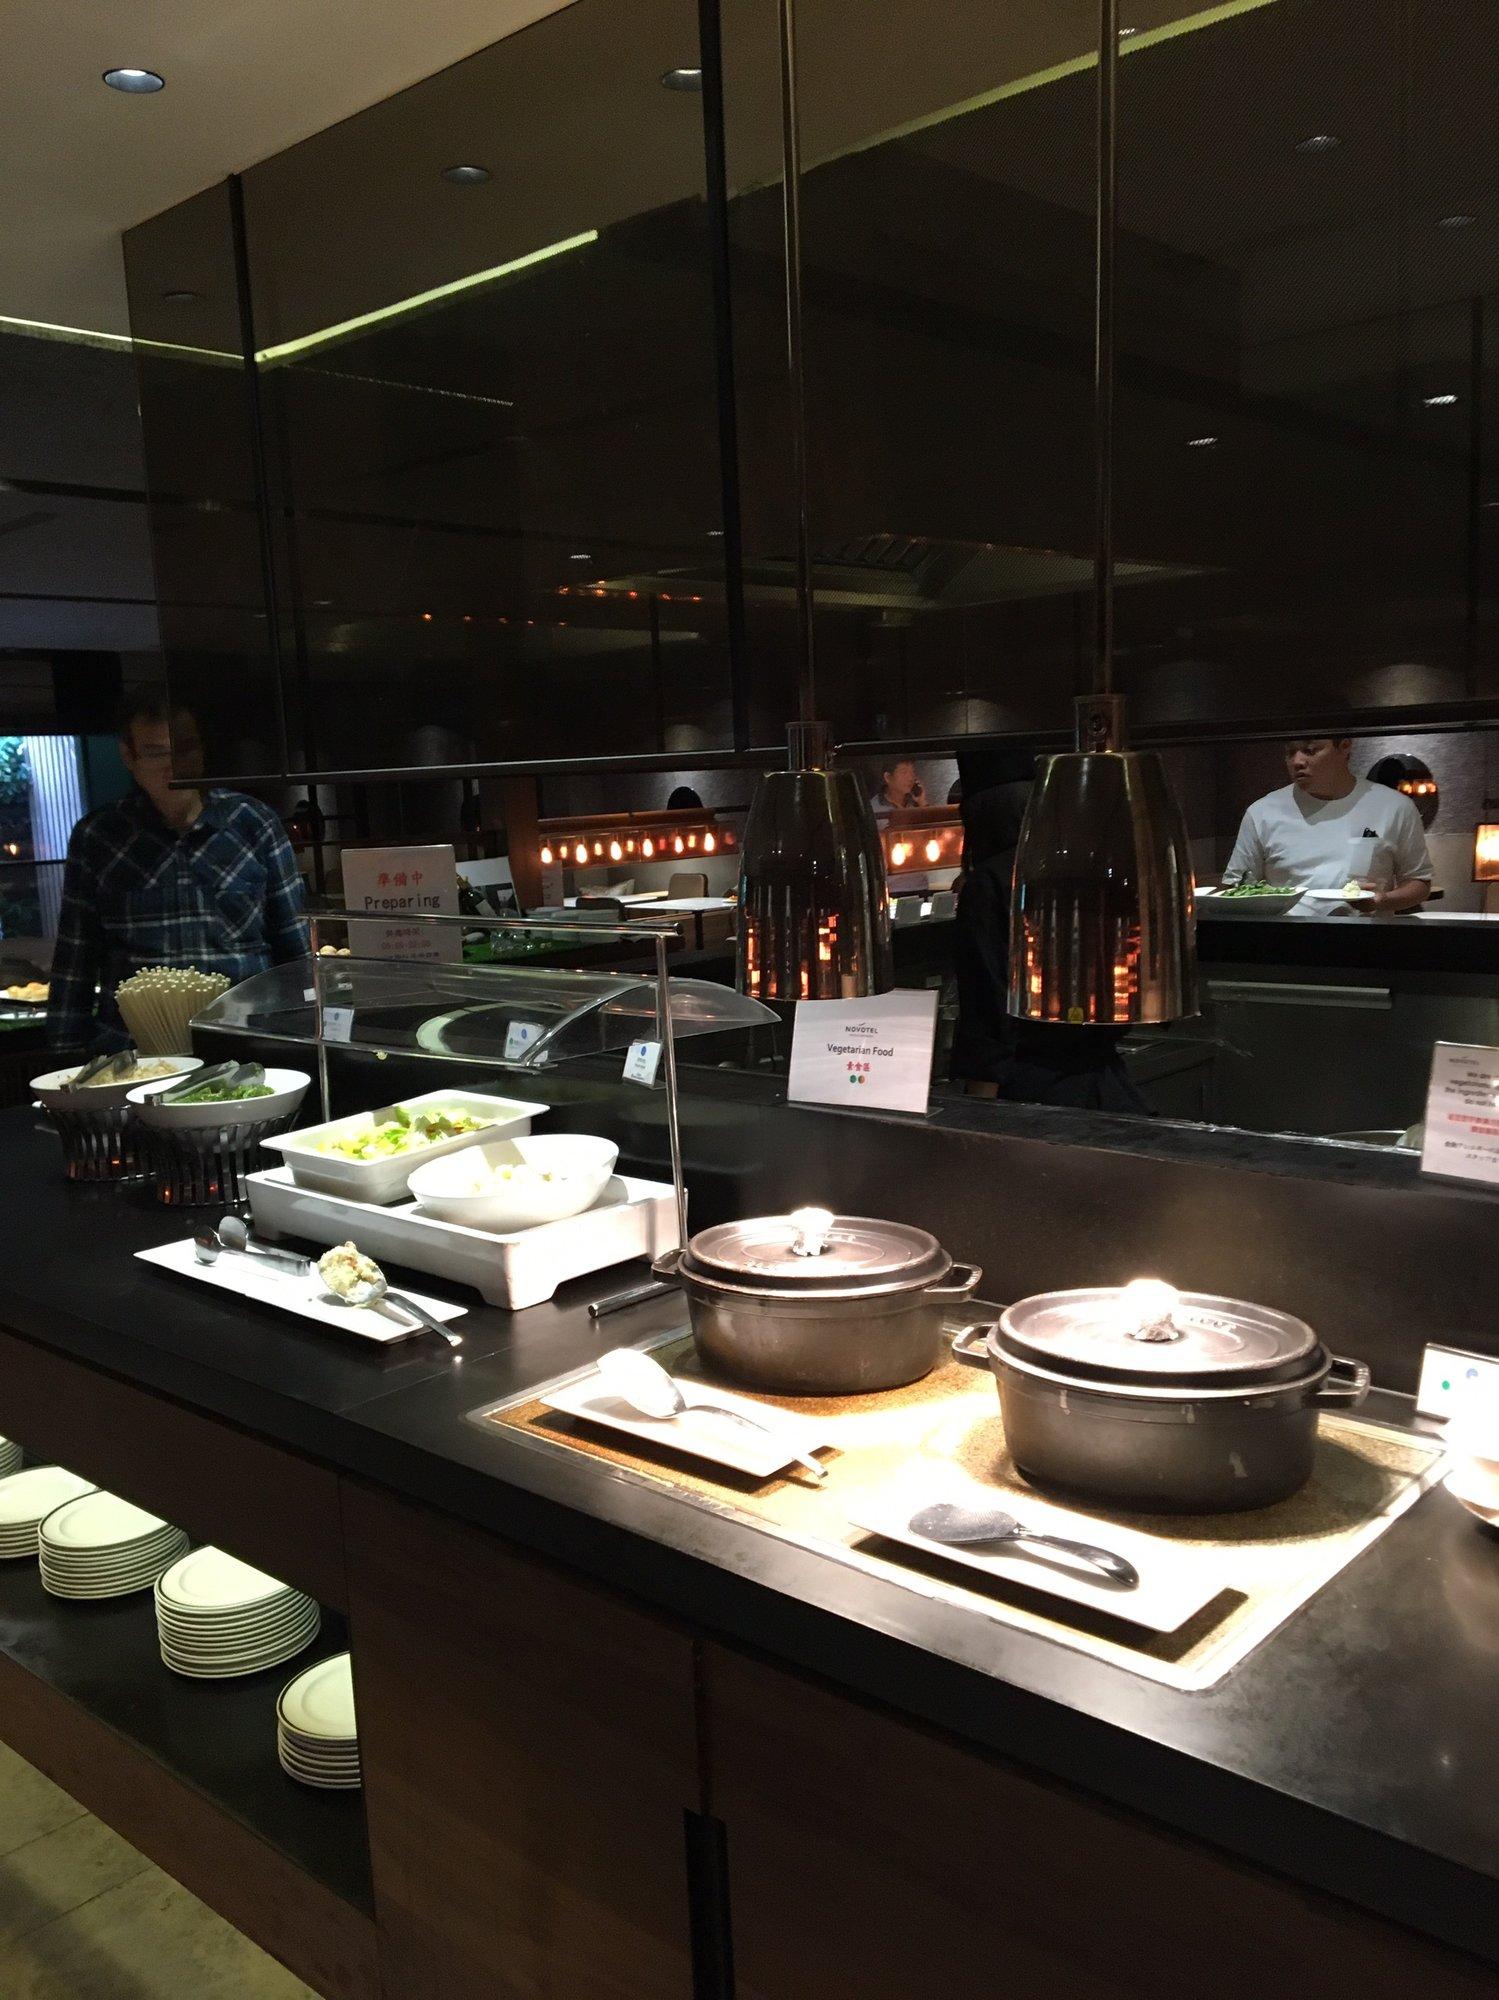 China Airlines Lounge (V1) image 21 of 44